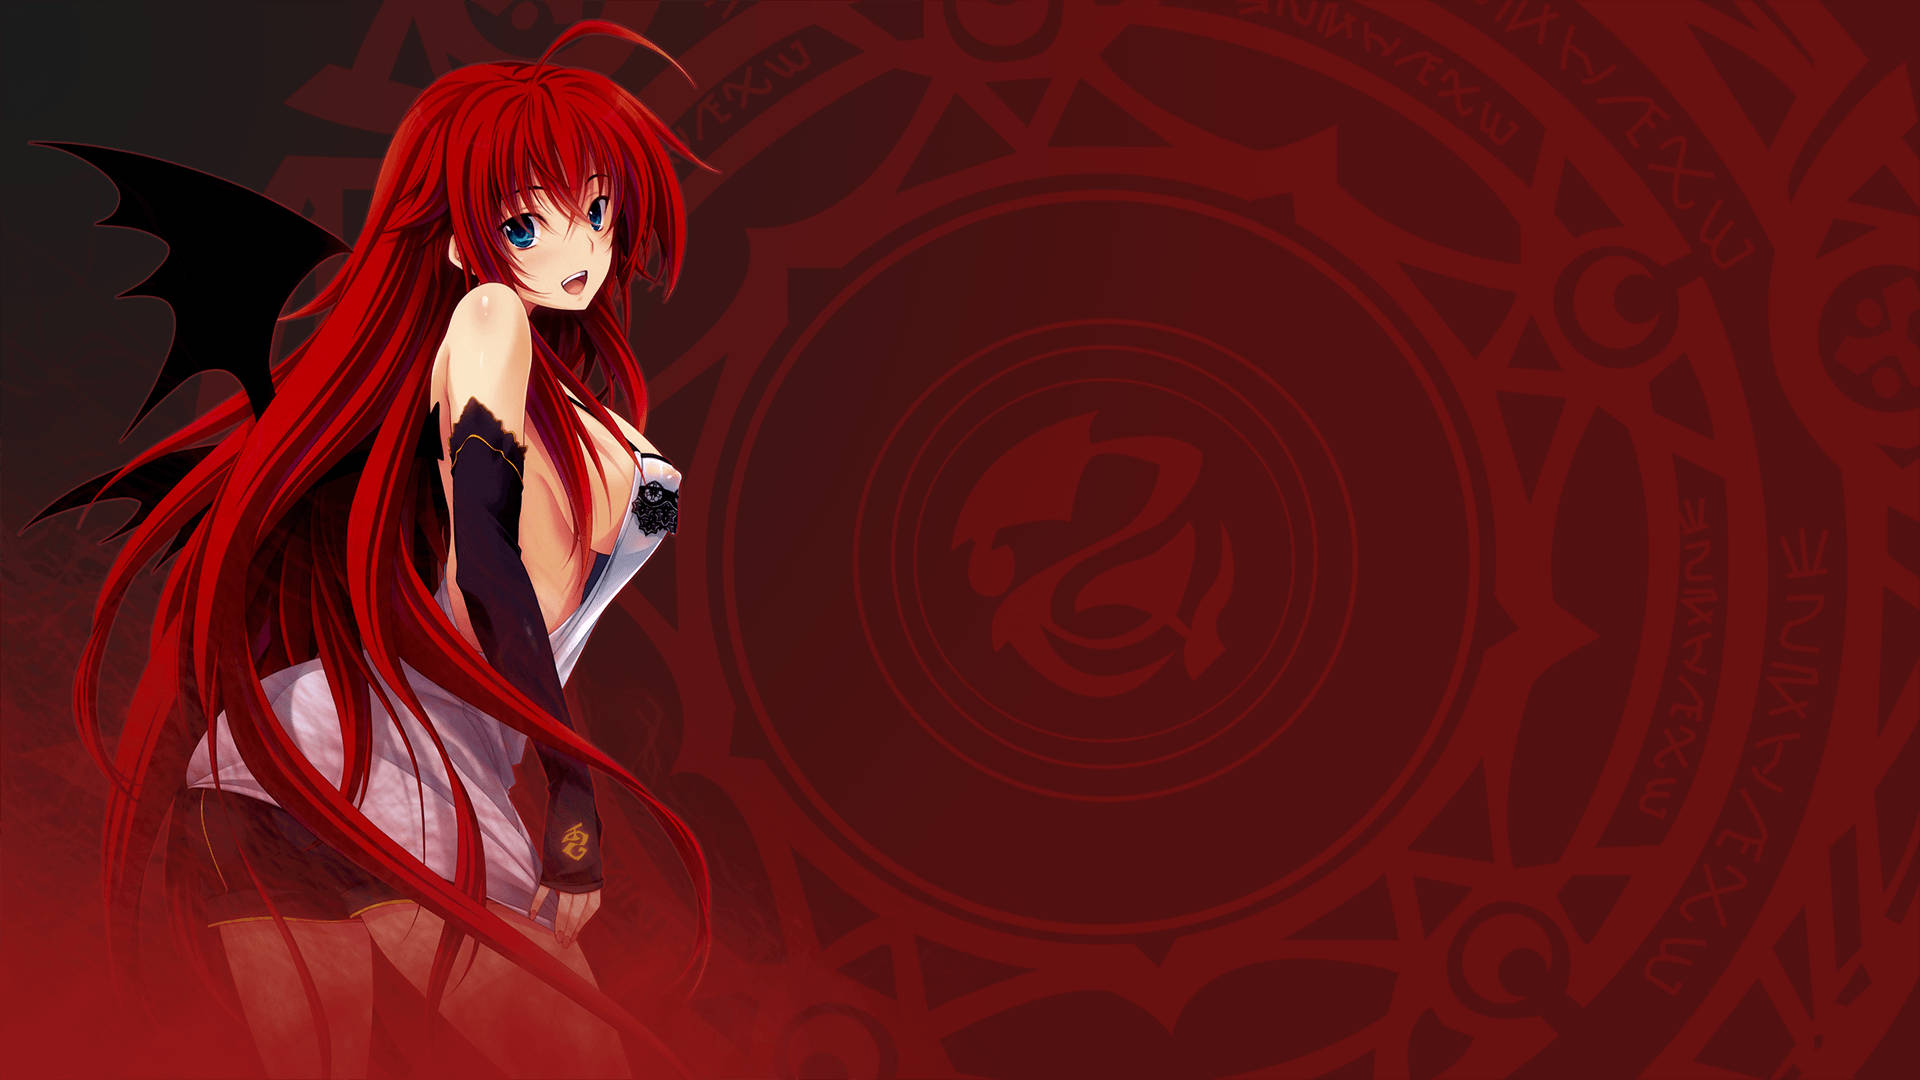 The Gremory Clan, Featuring Rias Gremory, In Highschool Dxd Background